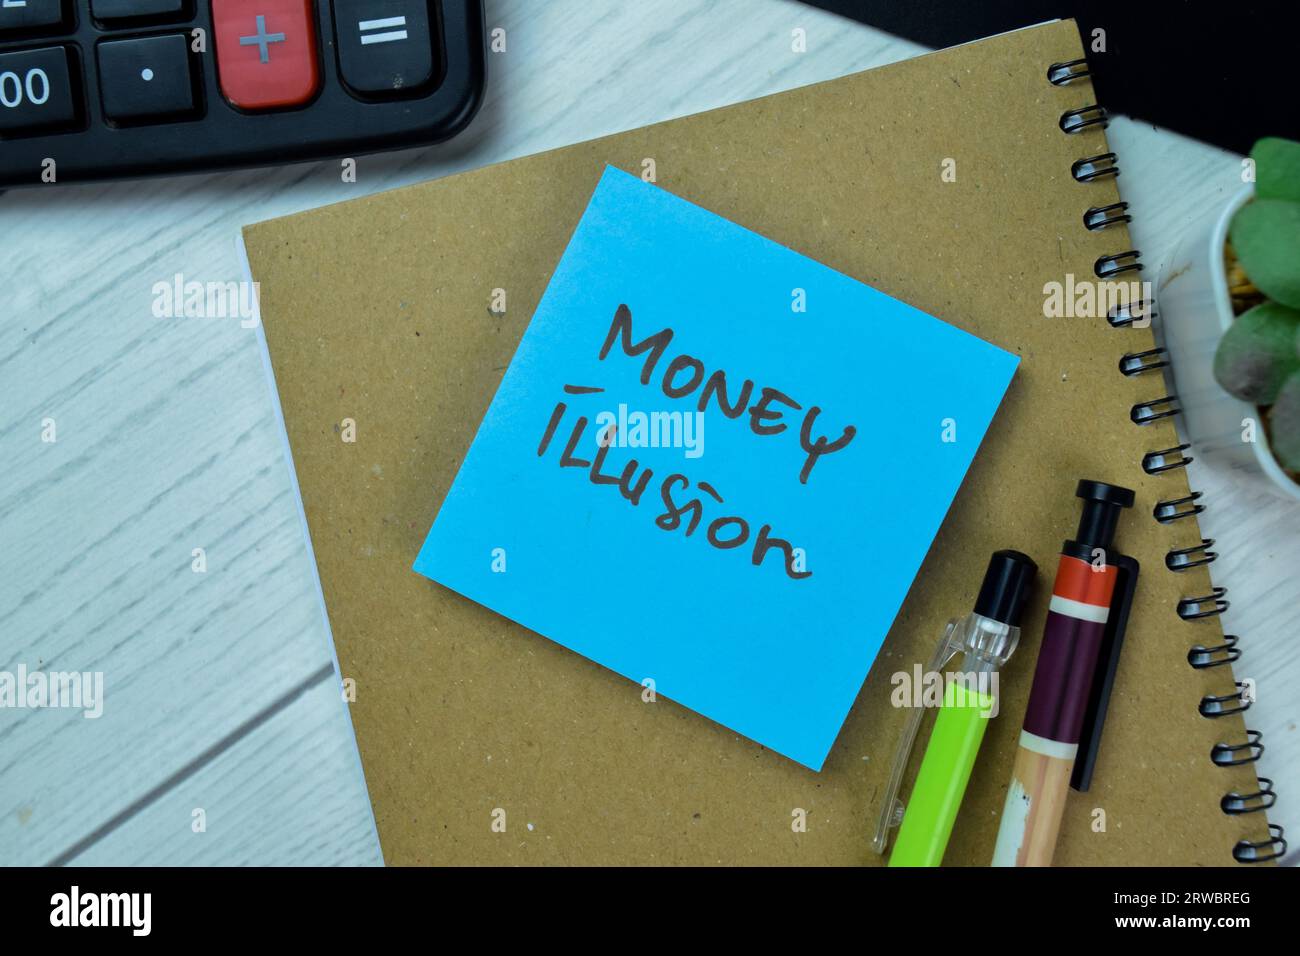 Concept of Money Illusion write on sticky notes isolated on Wooden Table. Stock Photo